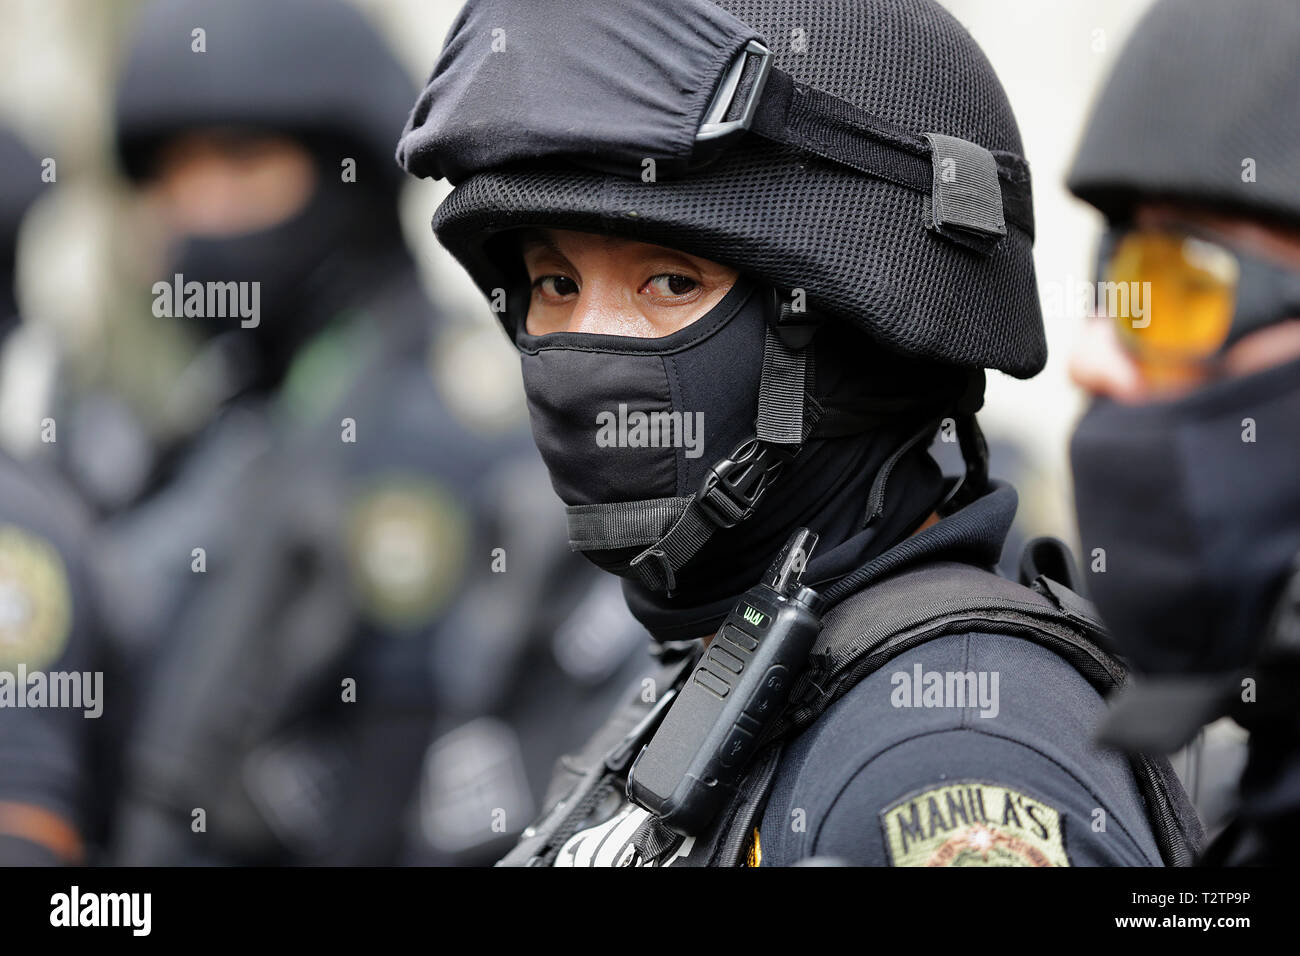 Manila, Philippines. 4th Apr, 2019. A member of the Philippine National Police's Special Weapons and Tactics (PNP-SWAT) participates in an anti-terrorism drill in Manila, the Philippines, April 4, 2019. Philippine security forces have tightened security after Wednesday's blast in southern Philippine Isulan town in Sultan Kudarat province that wounded 18 people at least, a military general said on Thursday. Credit: Rouelle Umali/Xinhua/Alamy Live News Stock Photo